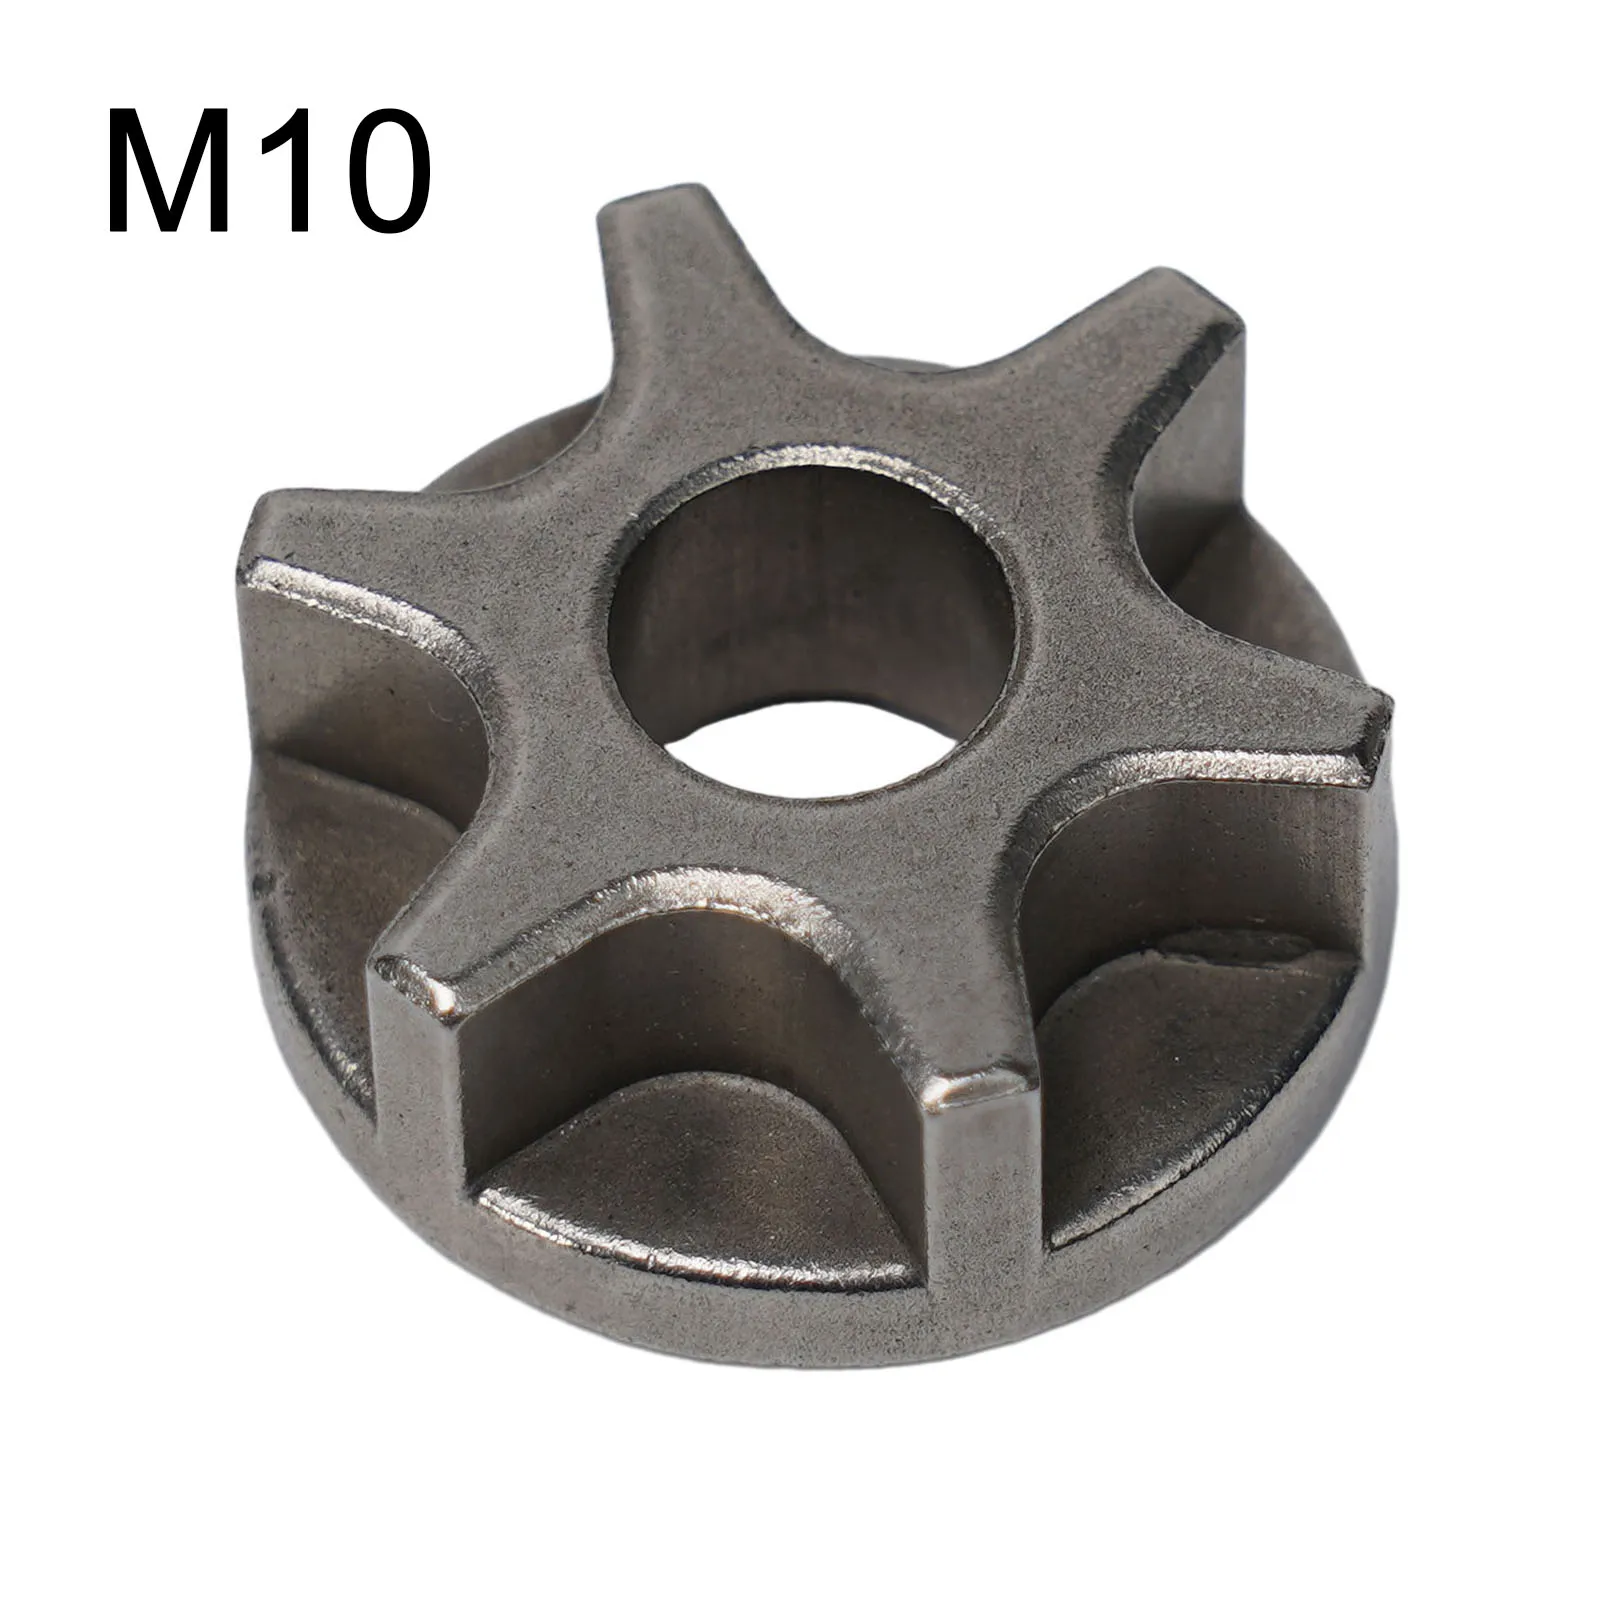 1pc M10 M14 M16 Sprocket Chain Saw Gear For 100 115 125 150 180 Angle Grinder Replacement Gear Chainsaw Bracket Part m14 chainsaw gear 100 115 125 150 180 grinder replacement gear sawing sprocket chain wheel for chainsaw dropship